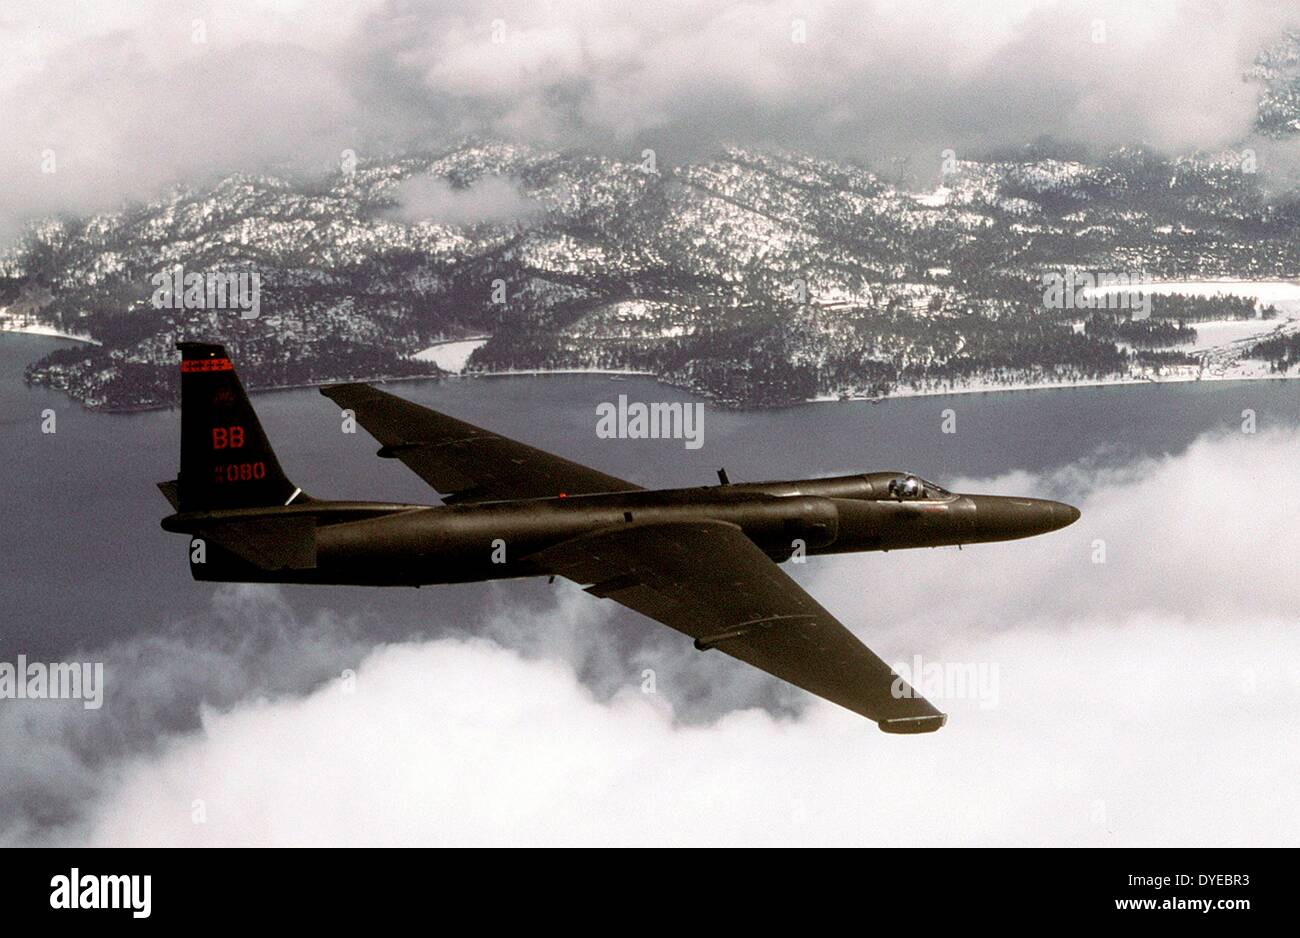 The Lockheed U-2, nicknamed 'Dragon Lady', is a single-engine, high-altitude reconnaissance aircraft operated by the United States Air Force (USAF) and previously flown by the Central Intelligence Agency (CIA). It provides day and night, very high-altitude (70,000 feet / 21,000 m), all-weather intelligence gathering Stock Photo